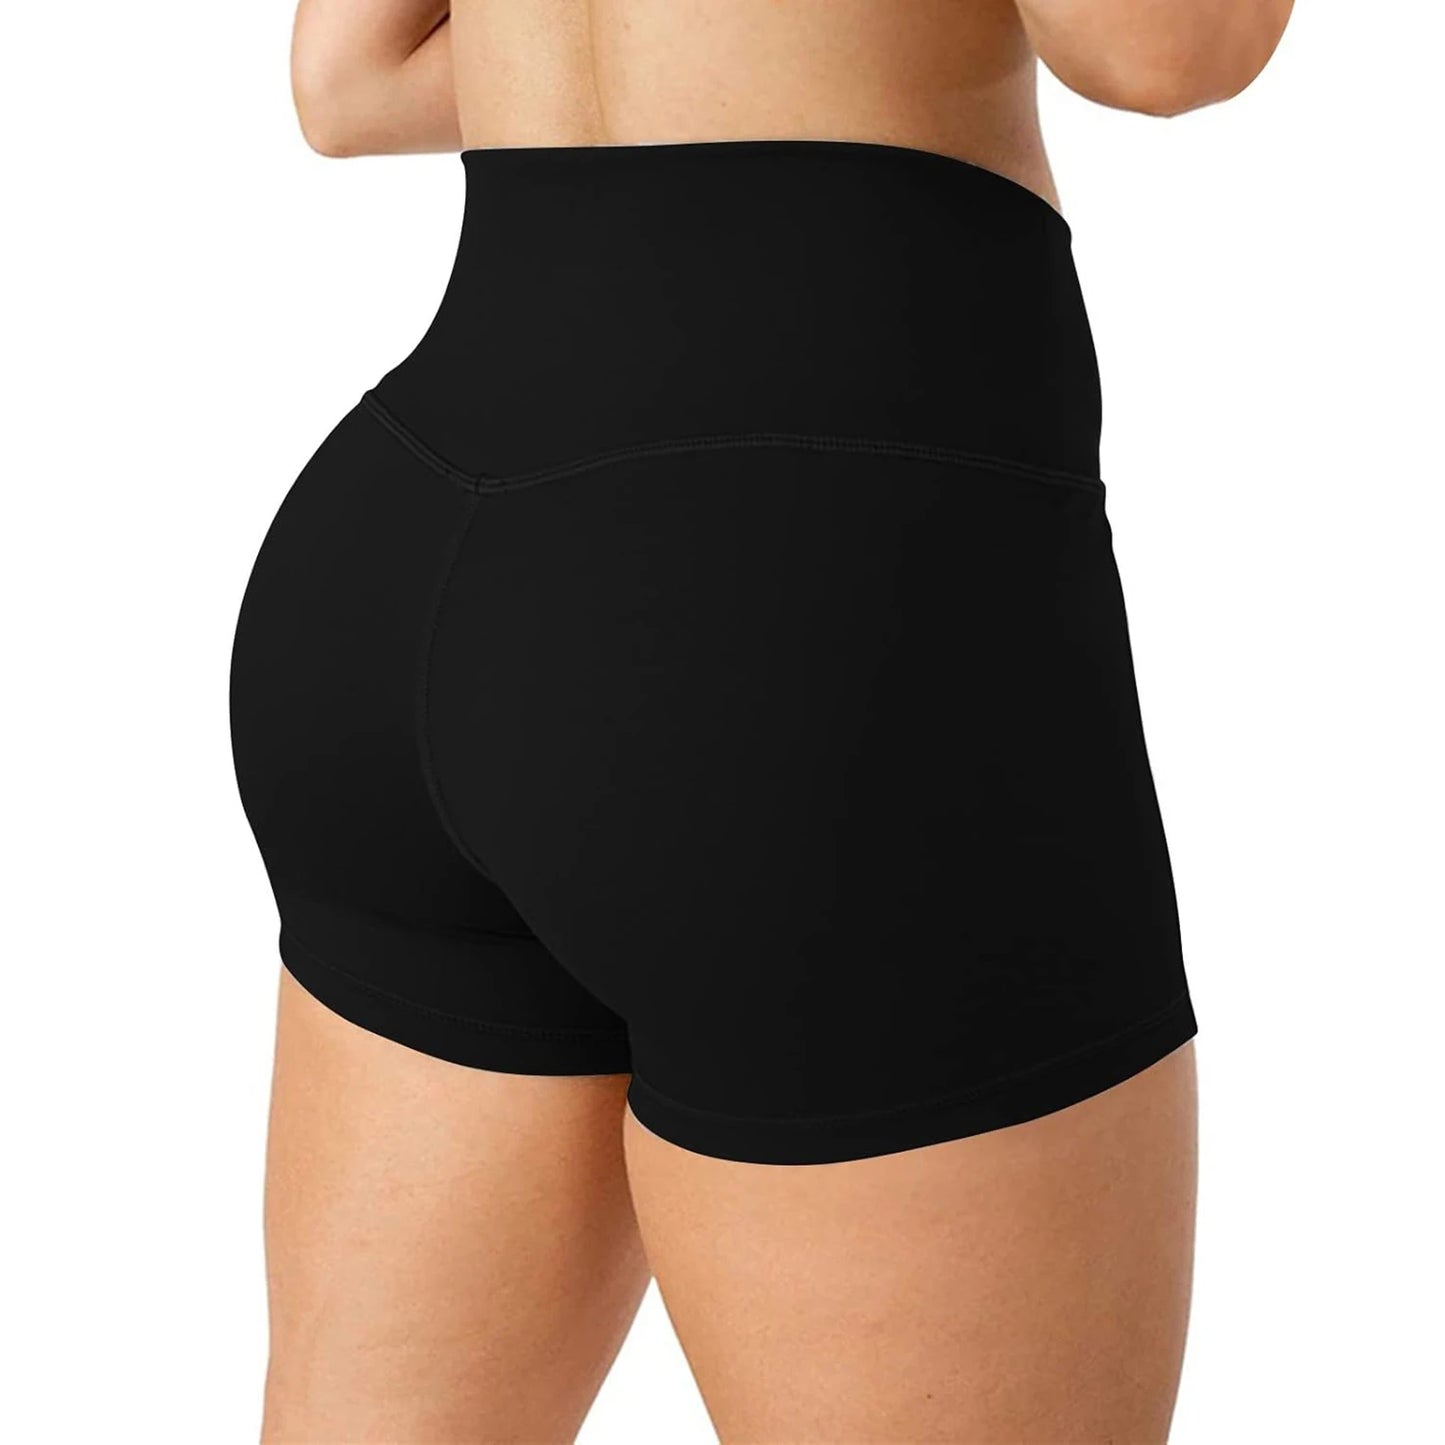 Womens Crossover Biker Shorts High Waist Booty Yoga Workout Athletic Running Spandex Shorts Scrunch Butt Leggings Female Clothes